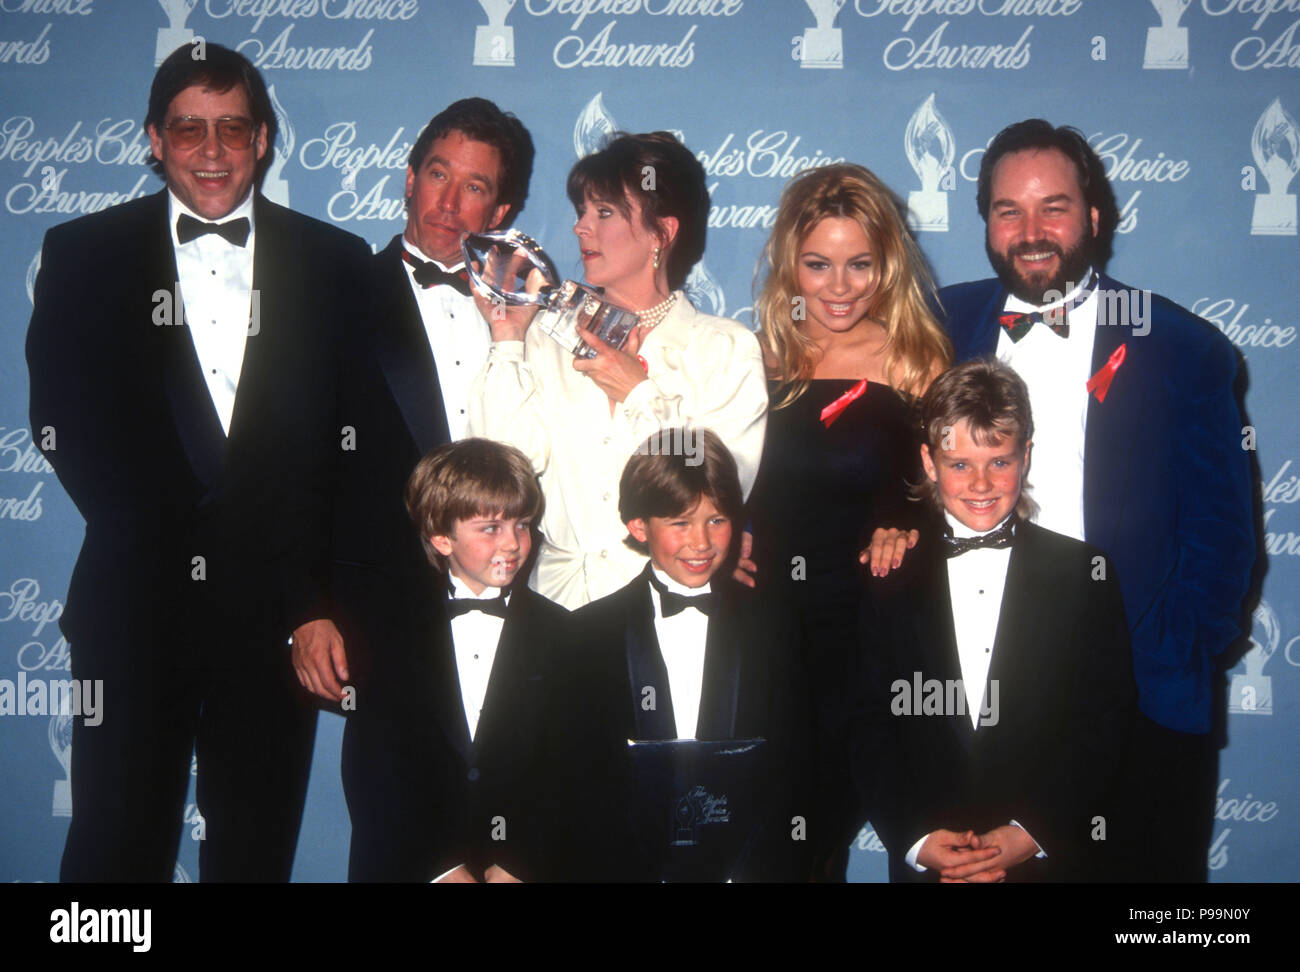 BEVERLY HILLS, CA - MARCH 17: (L-R) Actors Earl Hindman, Tim Allen, Patricia Richardson, Pamela Anderson, Richard Kam (back row) and Taran Noah Smith, Jonathan Taylor Thomas and Zachery Ty Bryan (front)attends the 18th Annual People's Choice Awards on March 17, 1992 at Universal Studios in Universal City, California. Photo by Barry King/Alamy Stock Photo Stock Photo